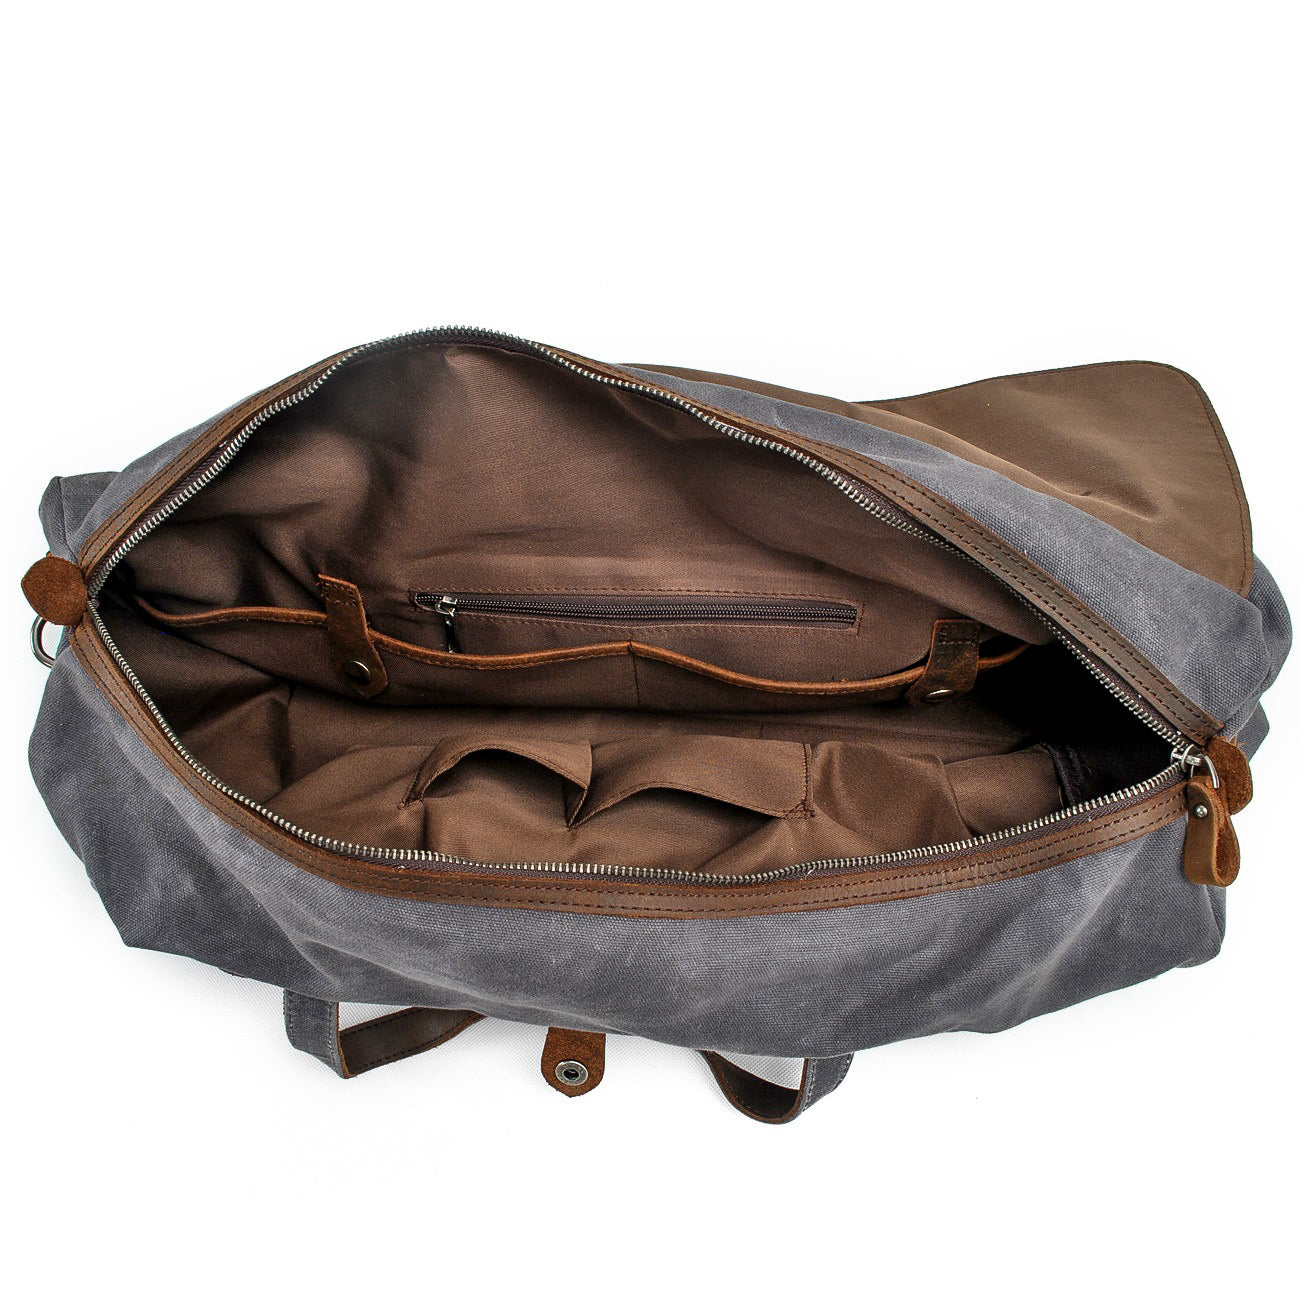 functional and foldable crossbody athletic duffle bag made of water-repellent and ripstop canvas